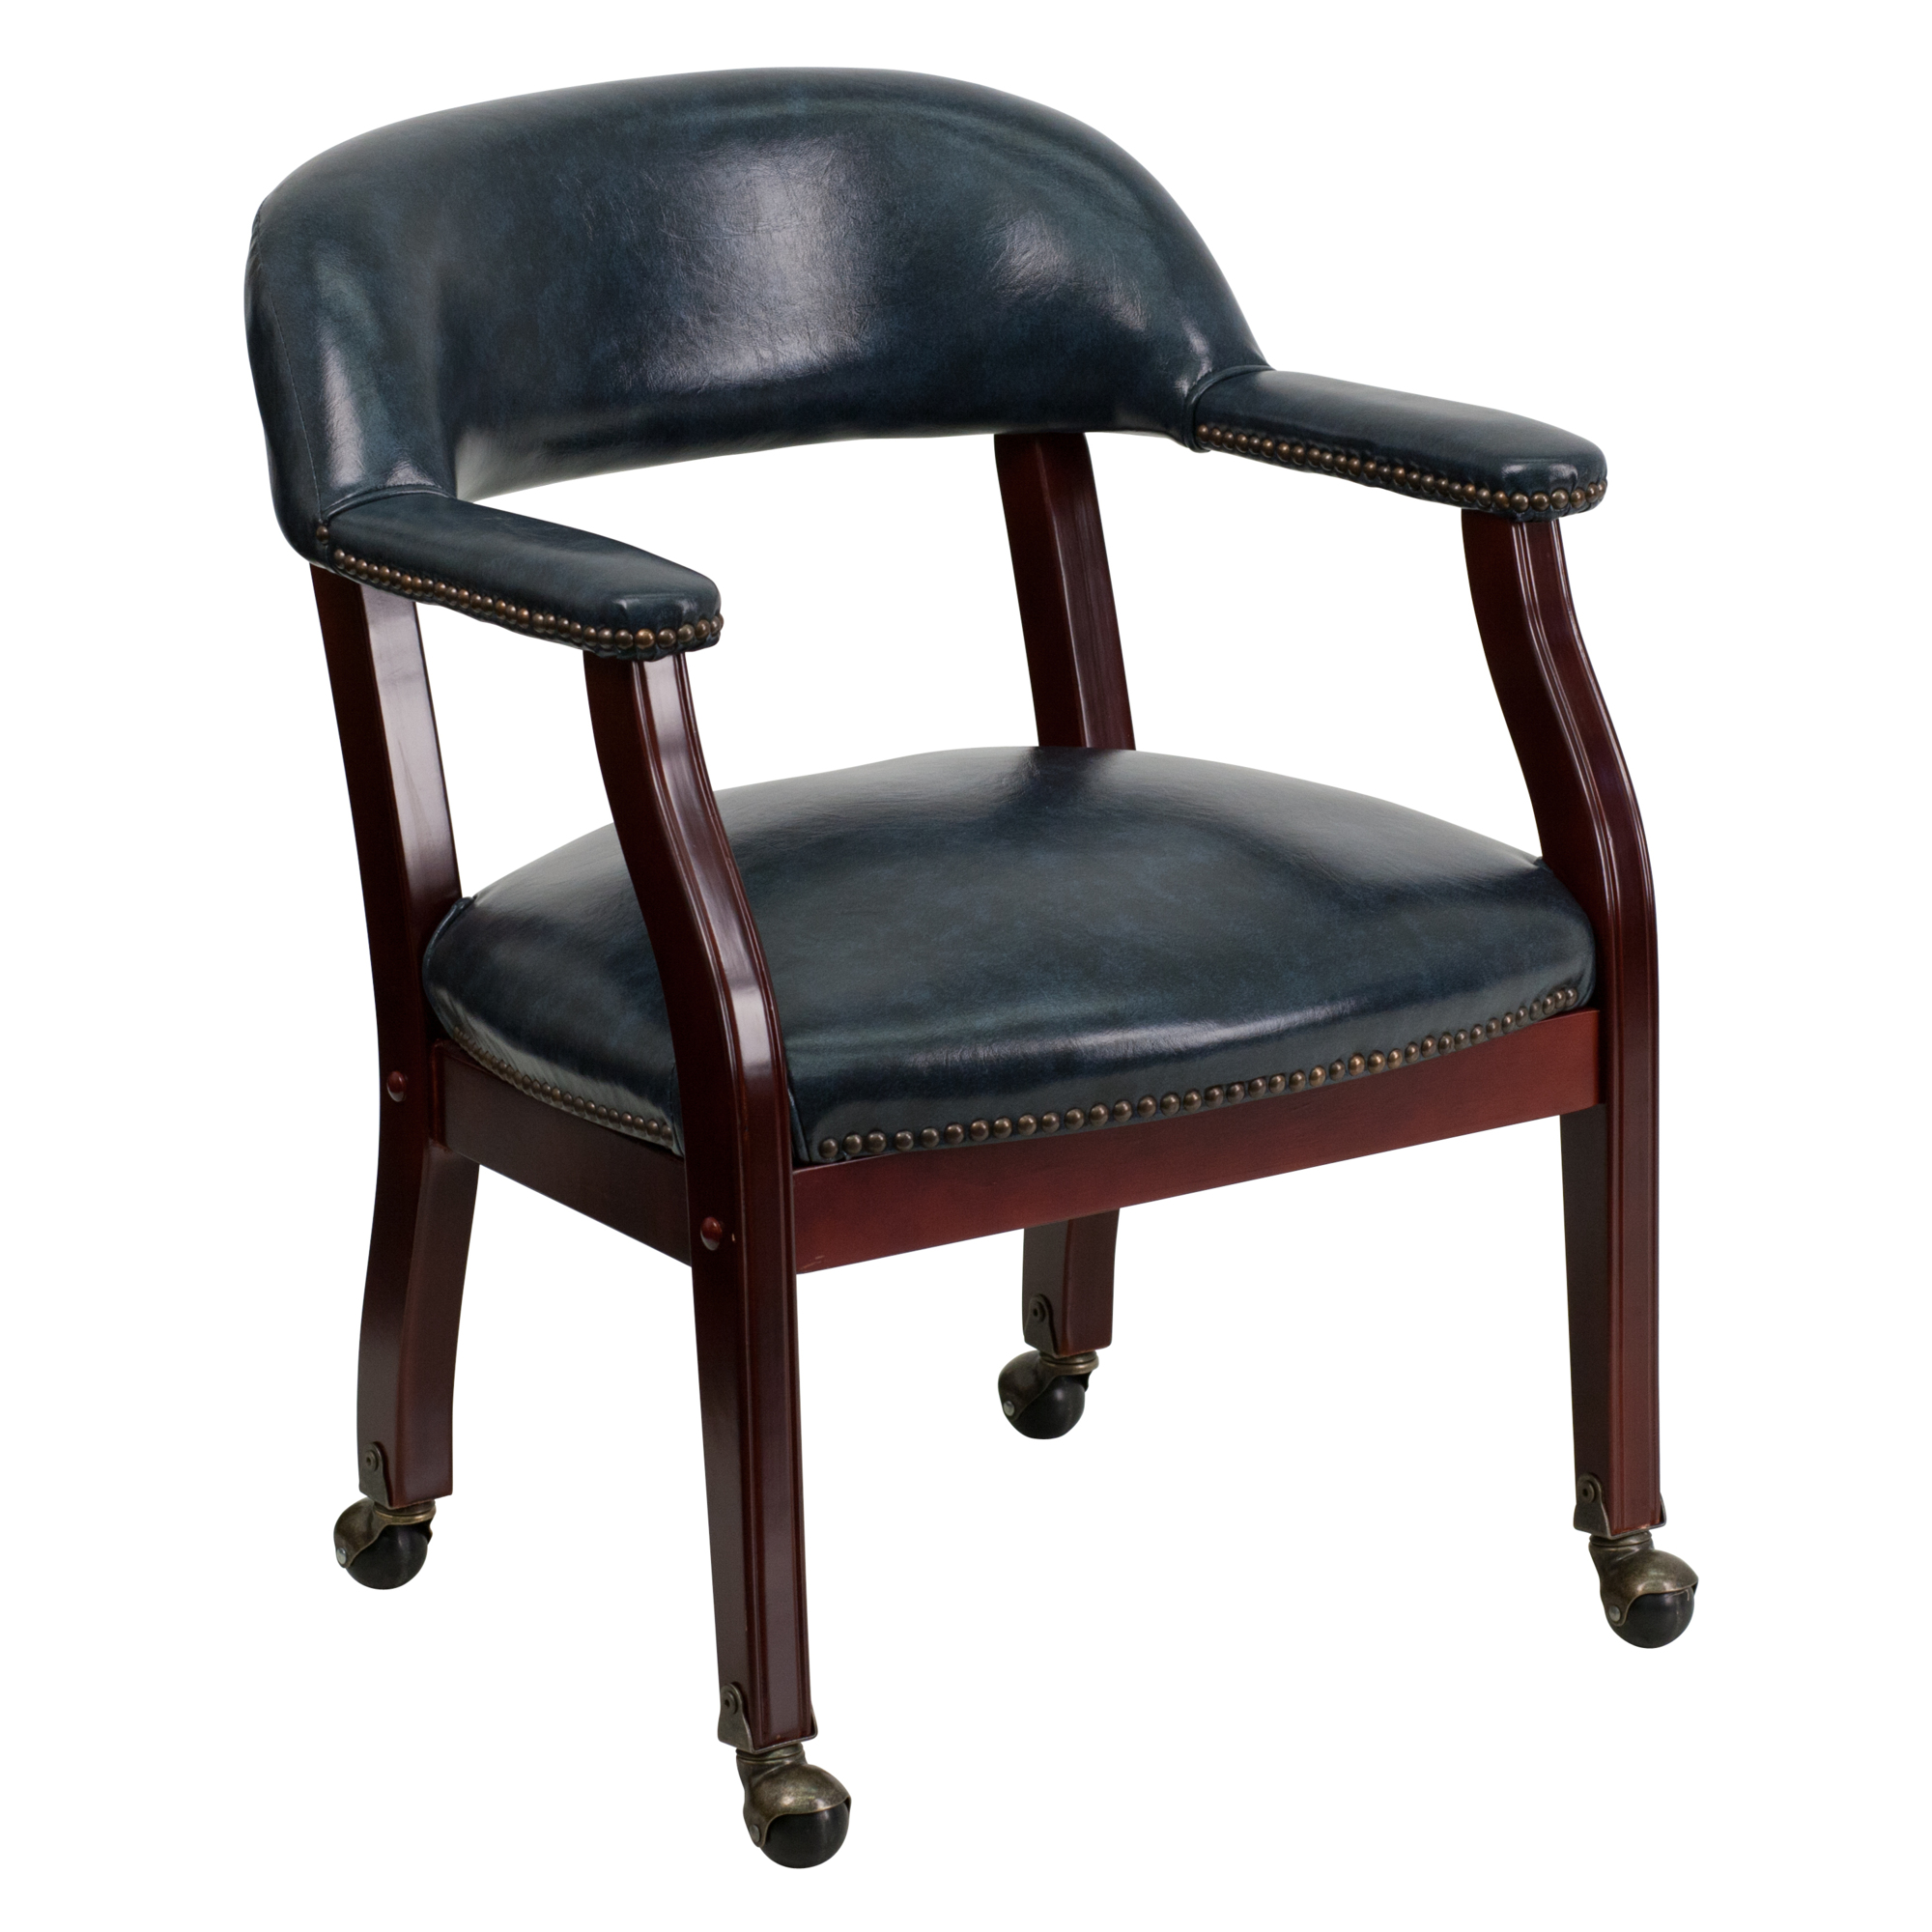 Flash Furniture, Navy Vinyl Conference Chair with Casters, Primary Color Blue, Included (qty.) 1, Model BZ100NVY